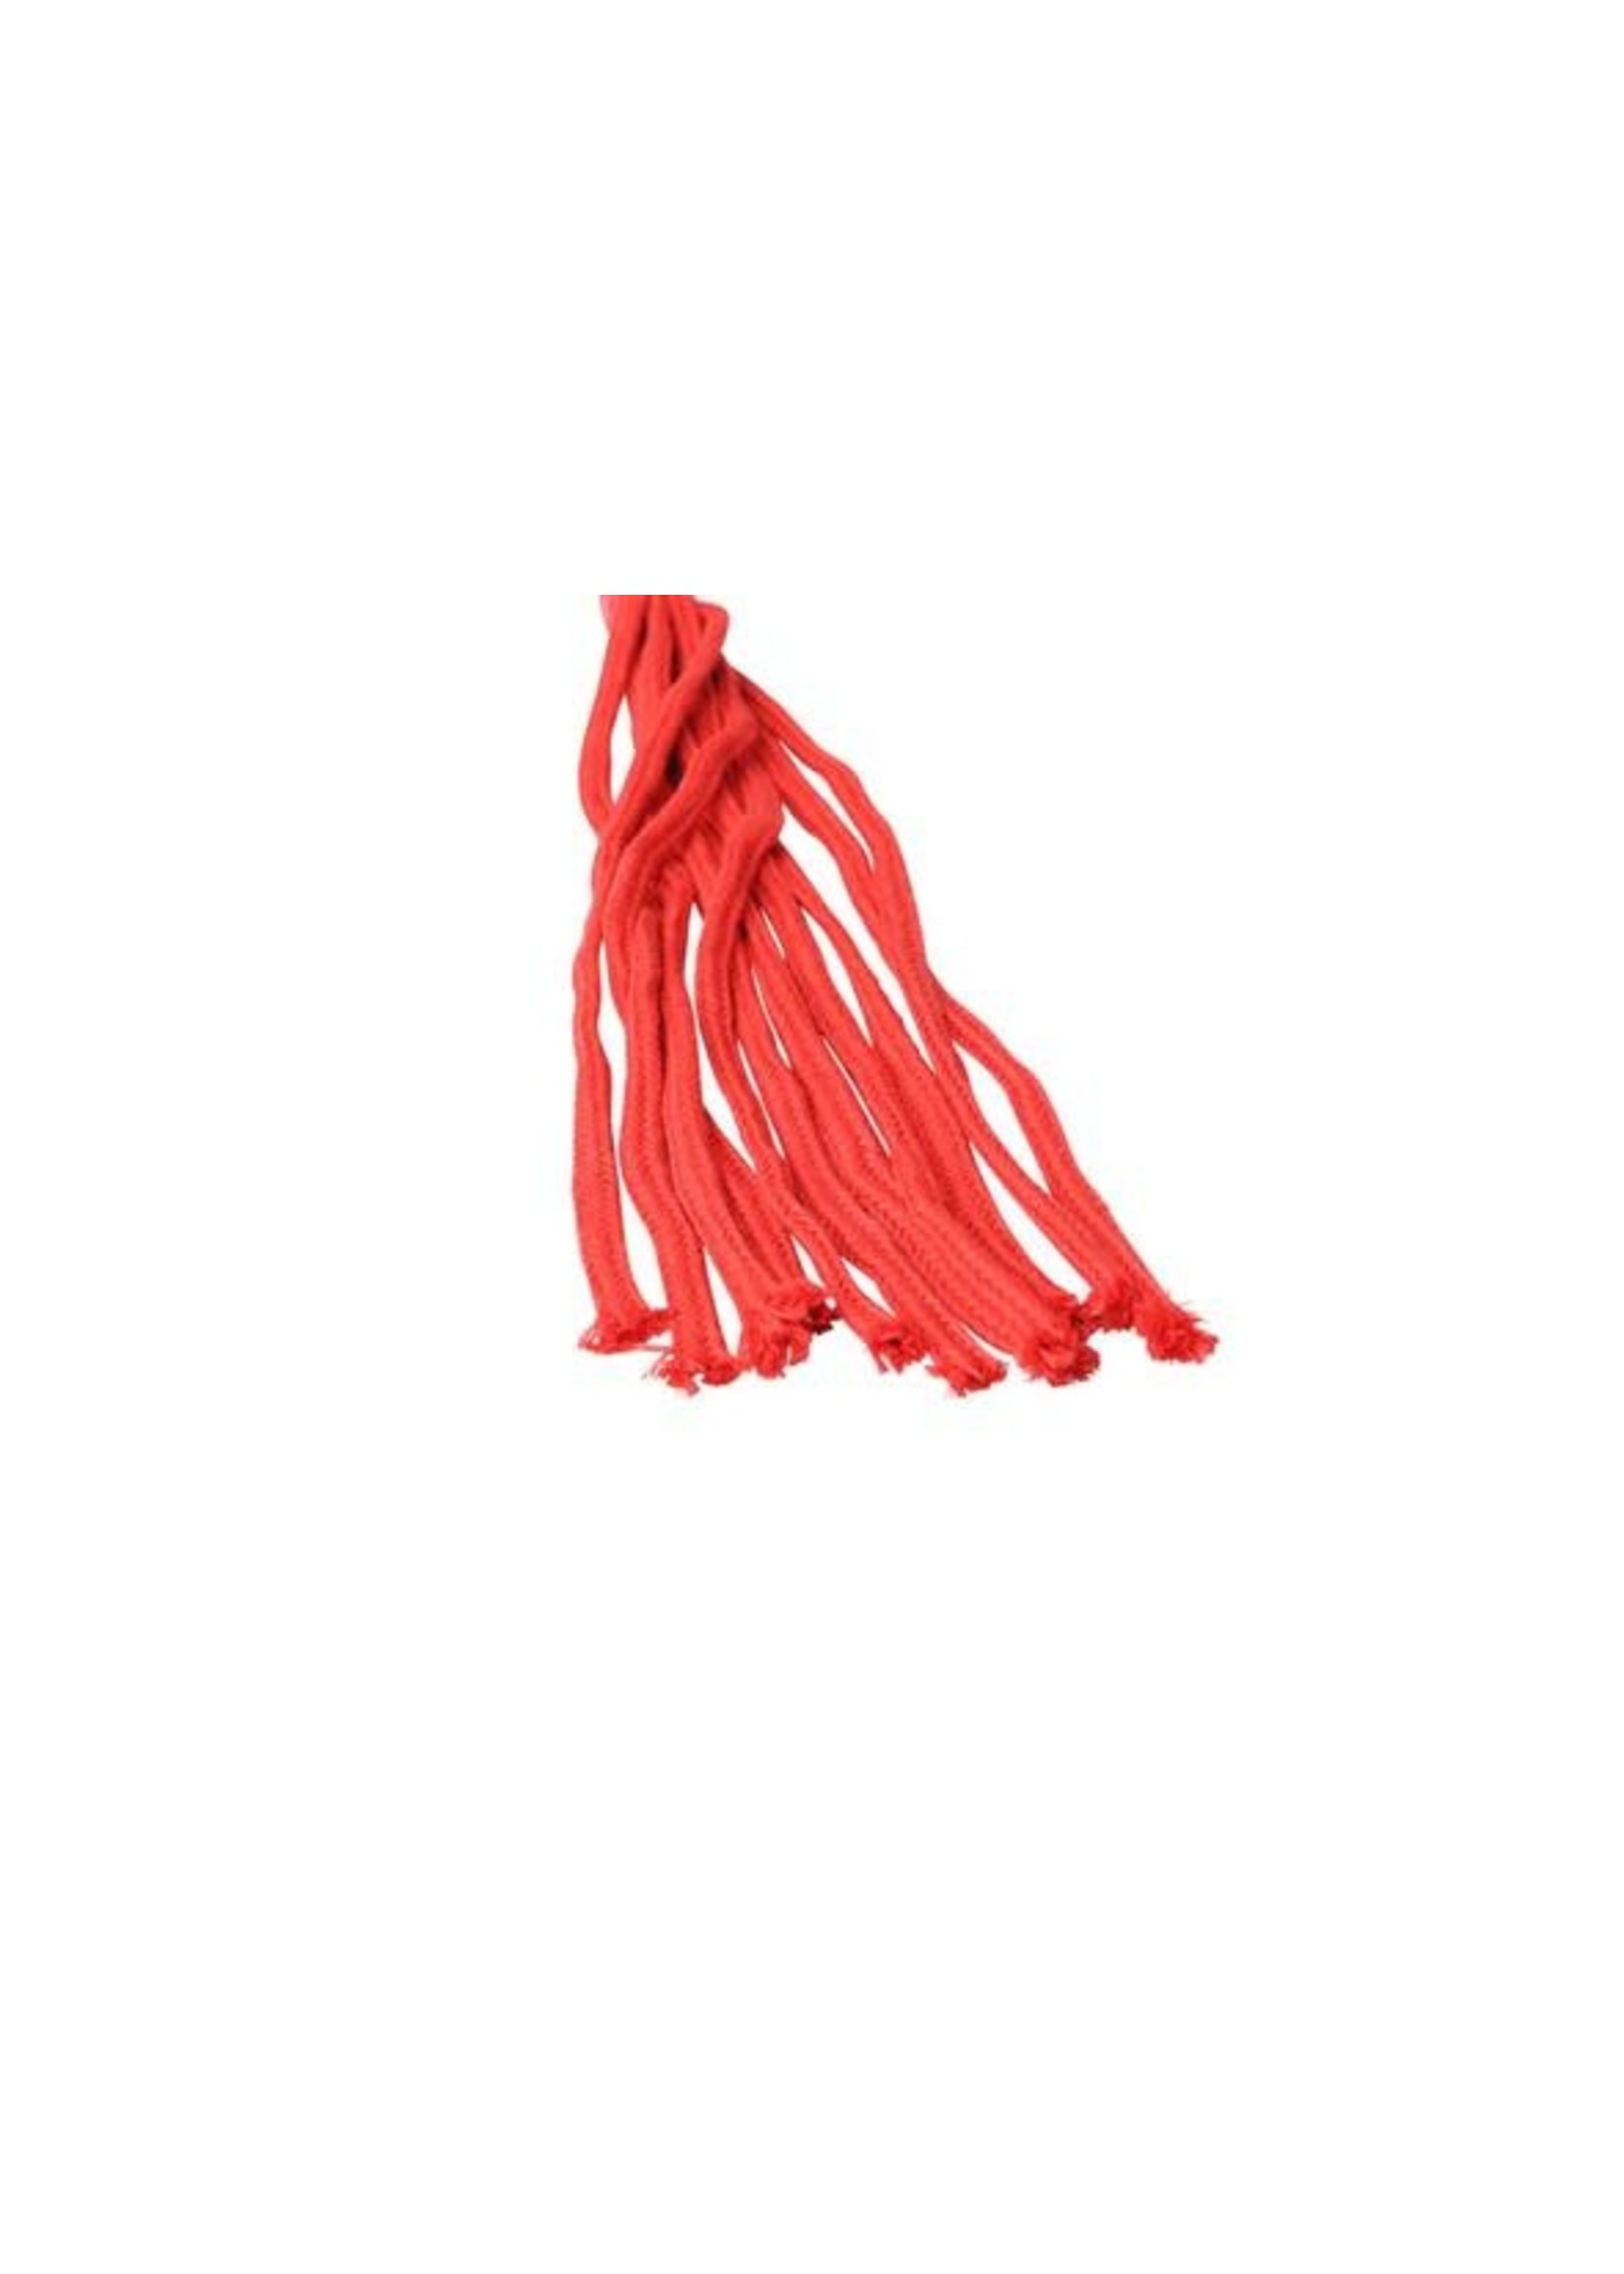 Sportsheets Sex and Mischief Red Rope Flogger